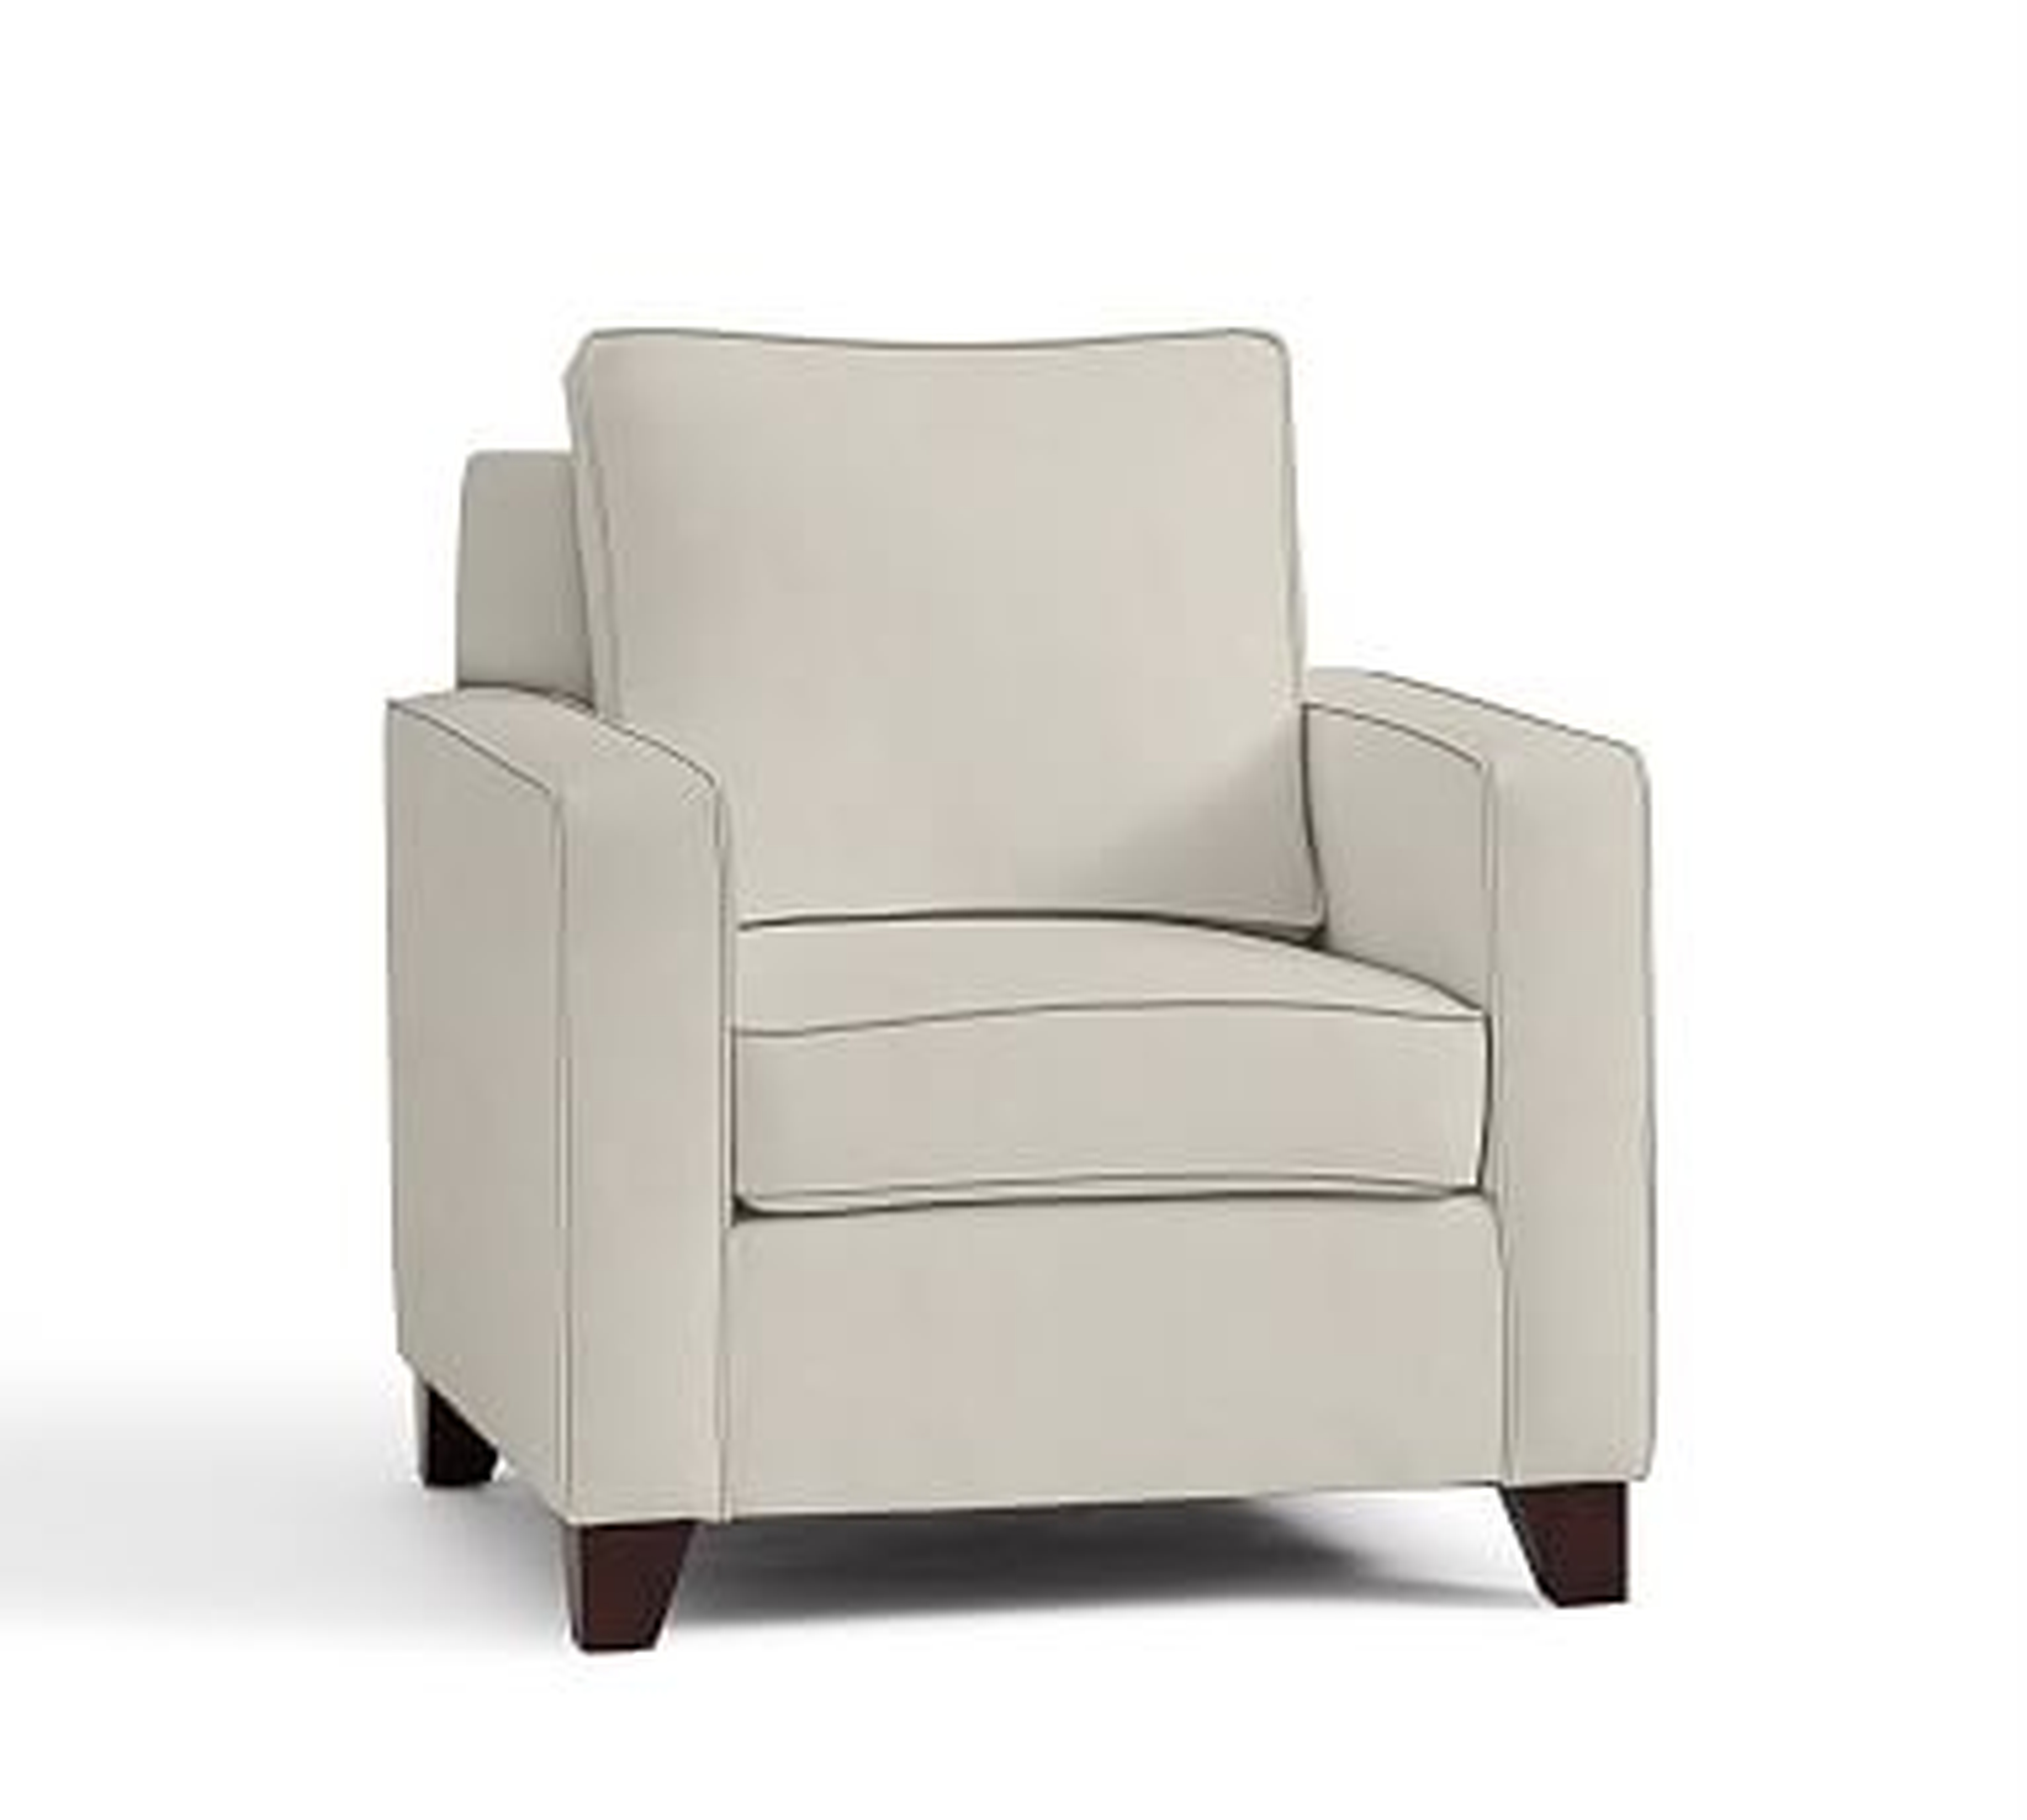 Cameron Square Arm Upholstered Armchair, Polyester Wrapped Cushions, Performance Everydaysuede(TM) Stone - Pottery Barn